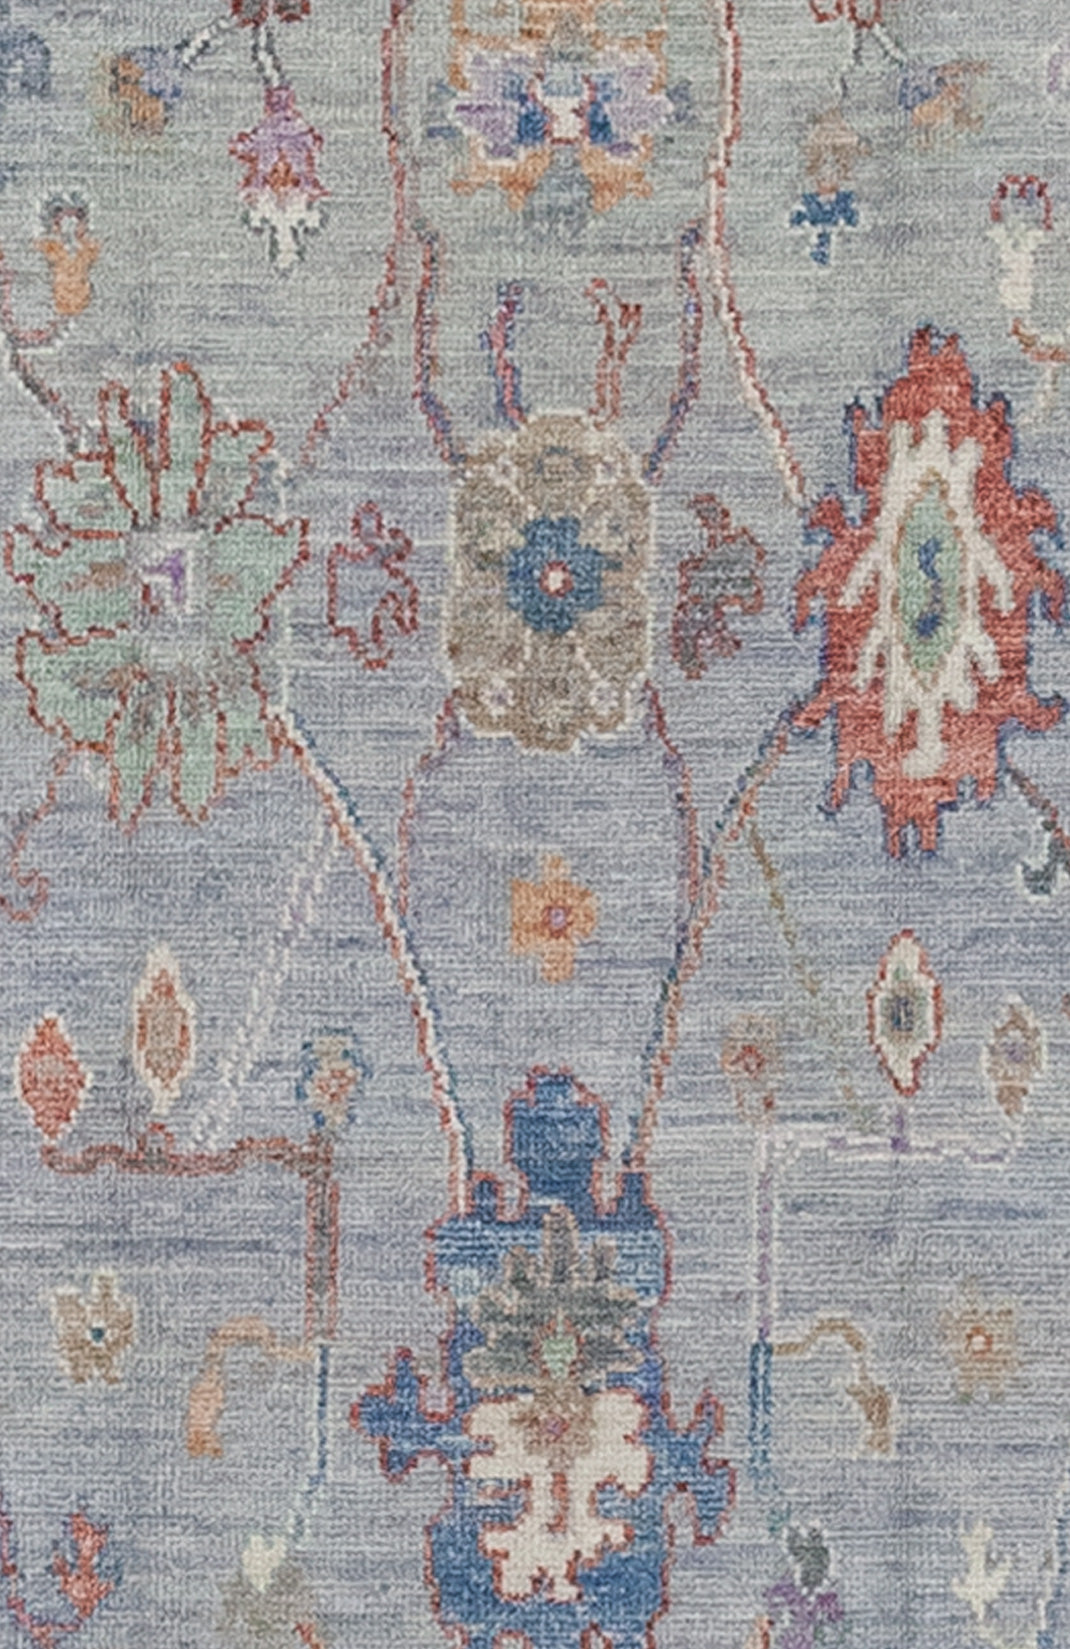 The rug center's close-up renders four big connected flowers with climbing plants. 